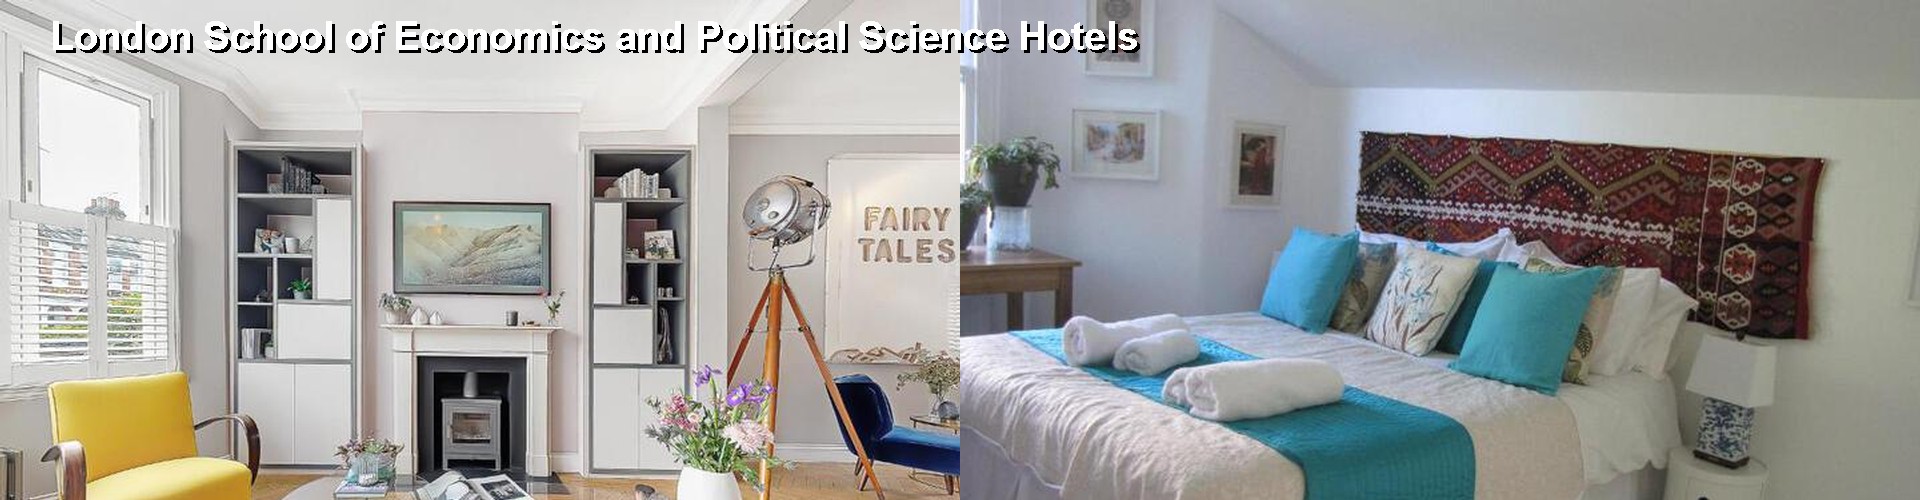 5 Best Hotels near London School of Economics and Political Science